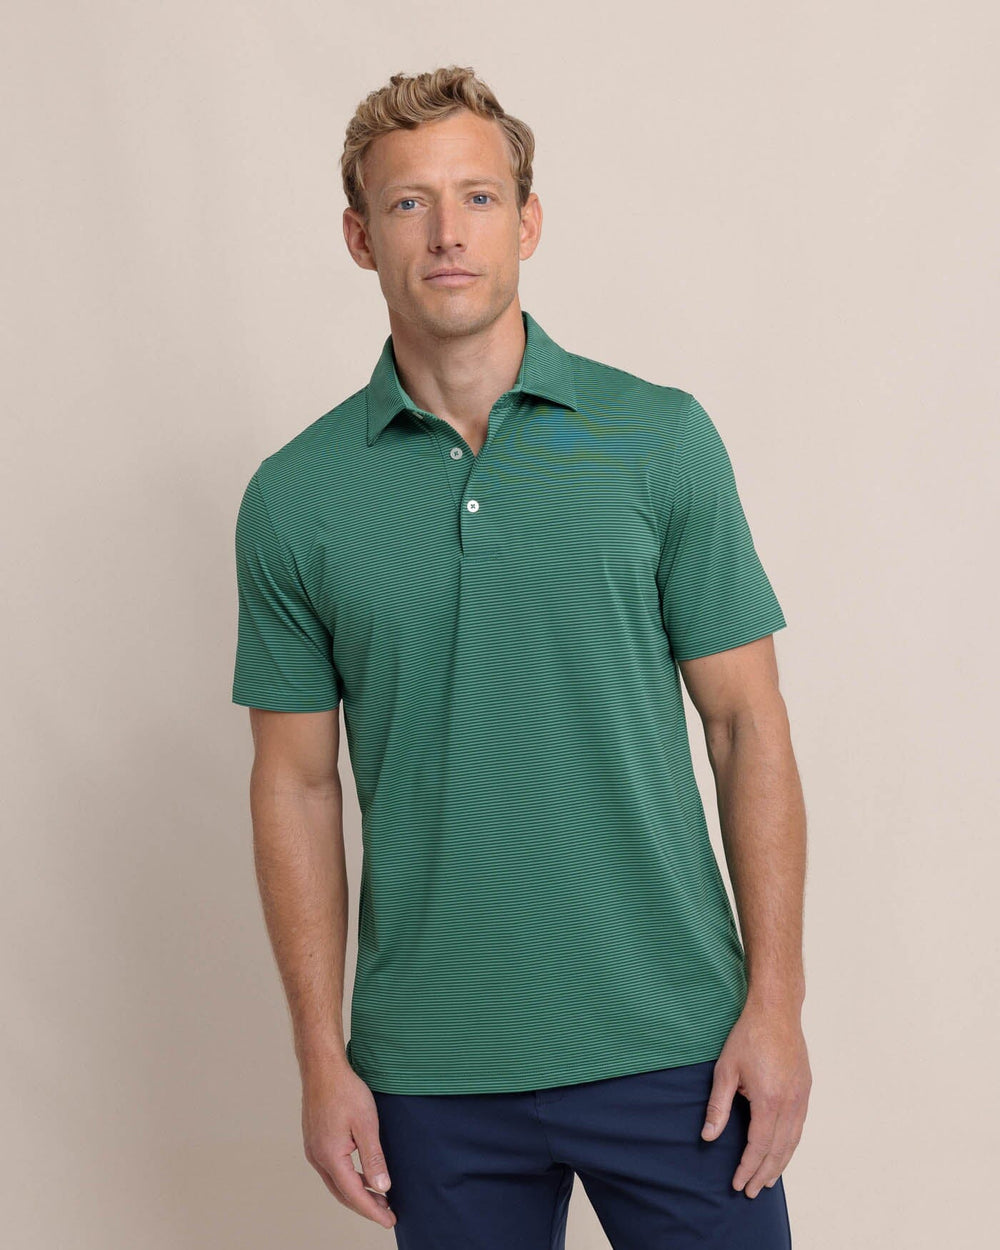 The front view of the Southern Tide brrr-eeze Meadowbrook Stripe Polo by Southern Tide - Fir